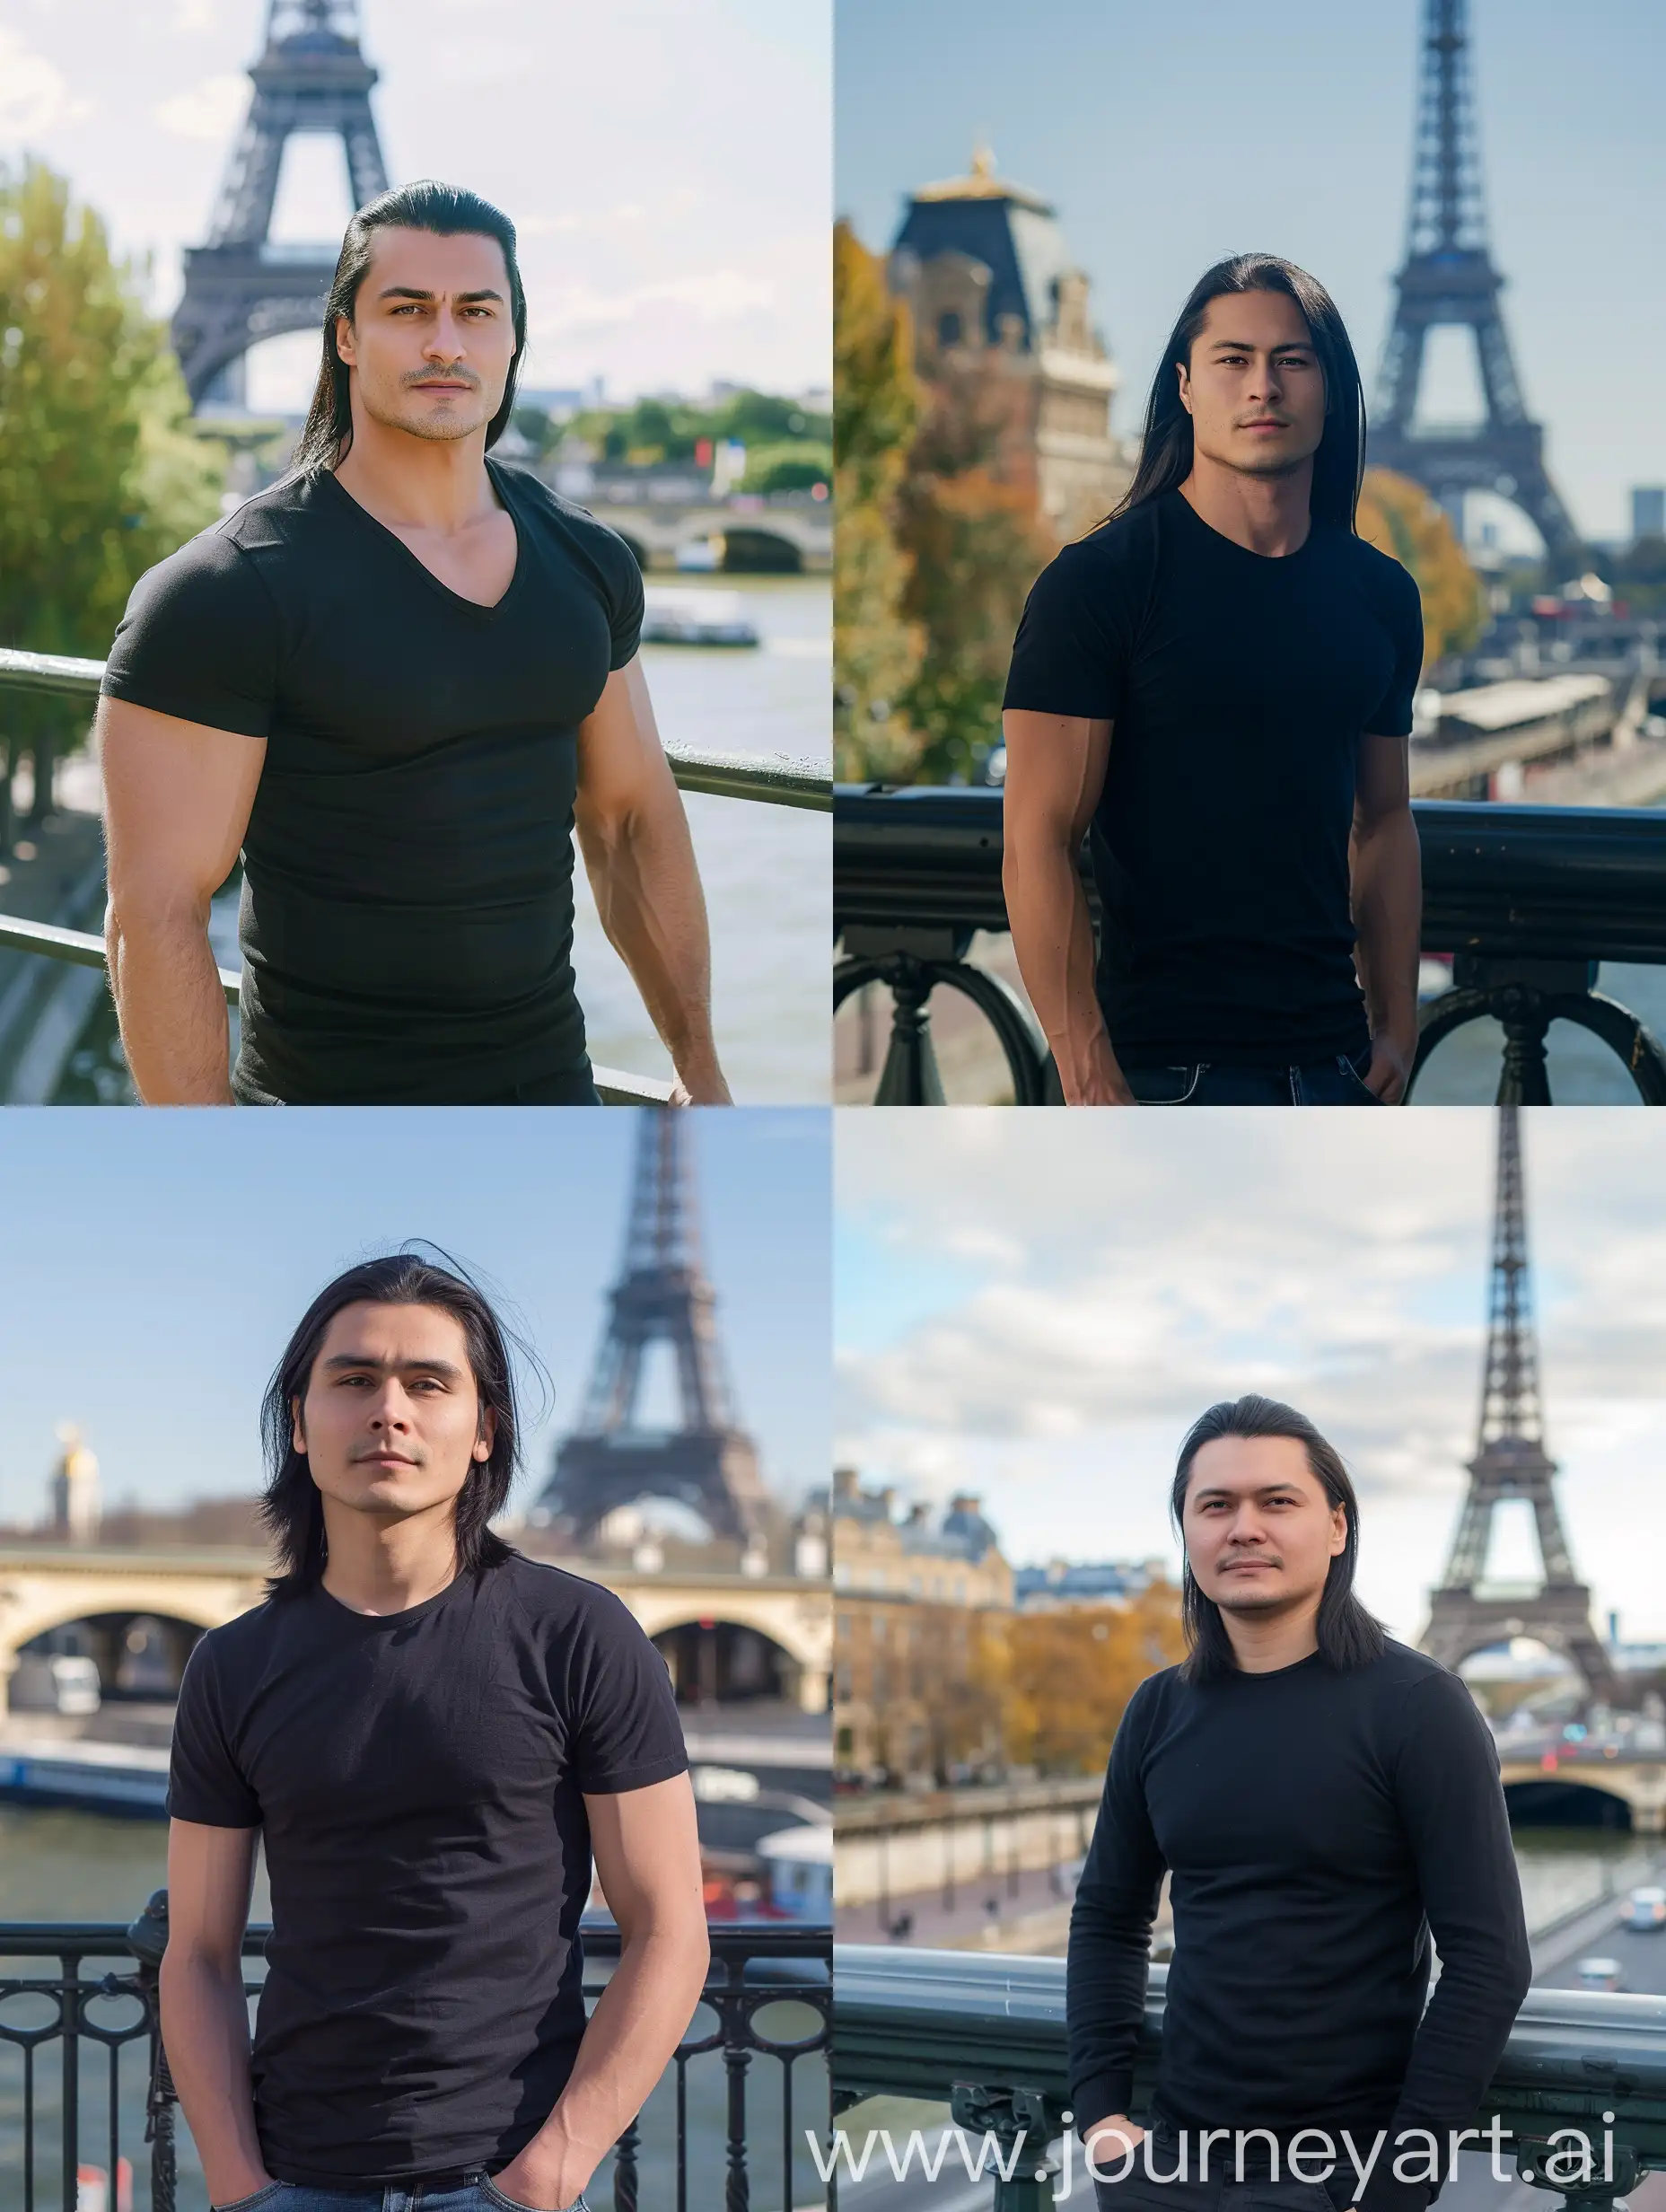 Russian-Man-with-Ideal-Physique-Posing-on-Parisian-Bridge-with-Eiffel-Tower-Background